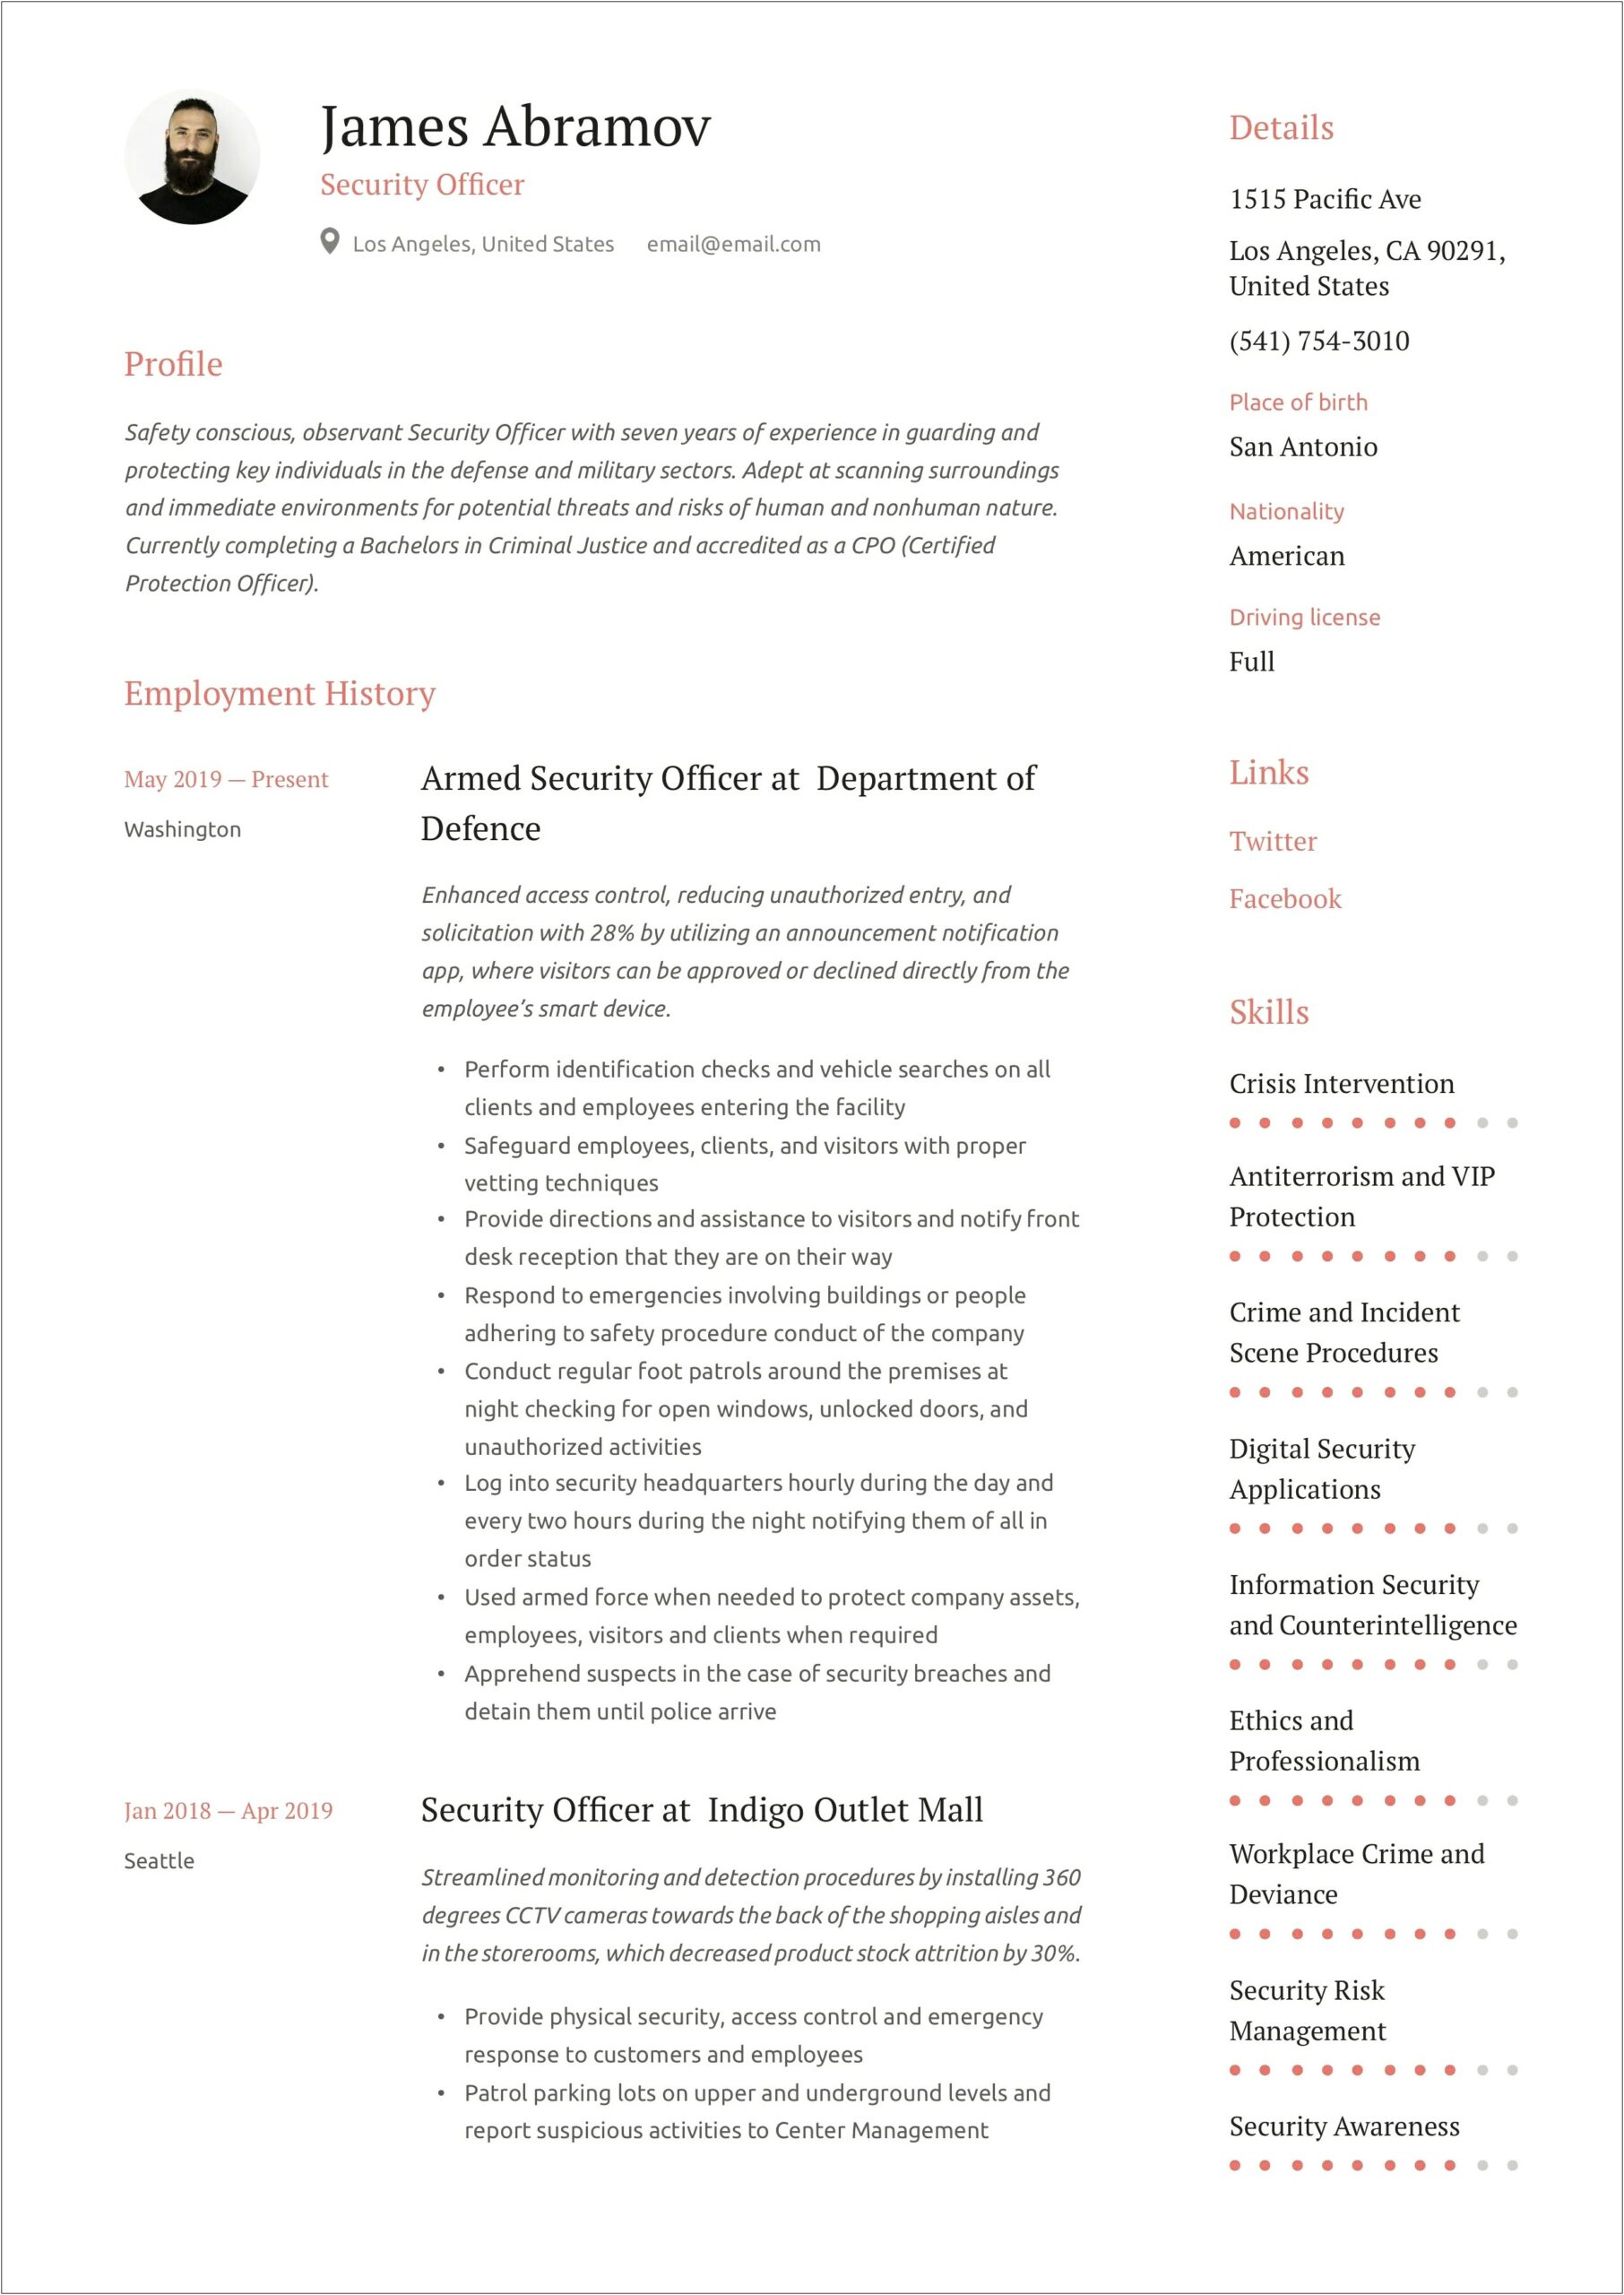 Security Officer For Weiser Security Skills For Resume